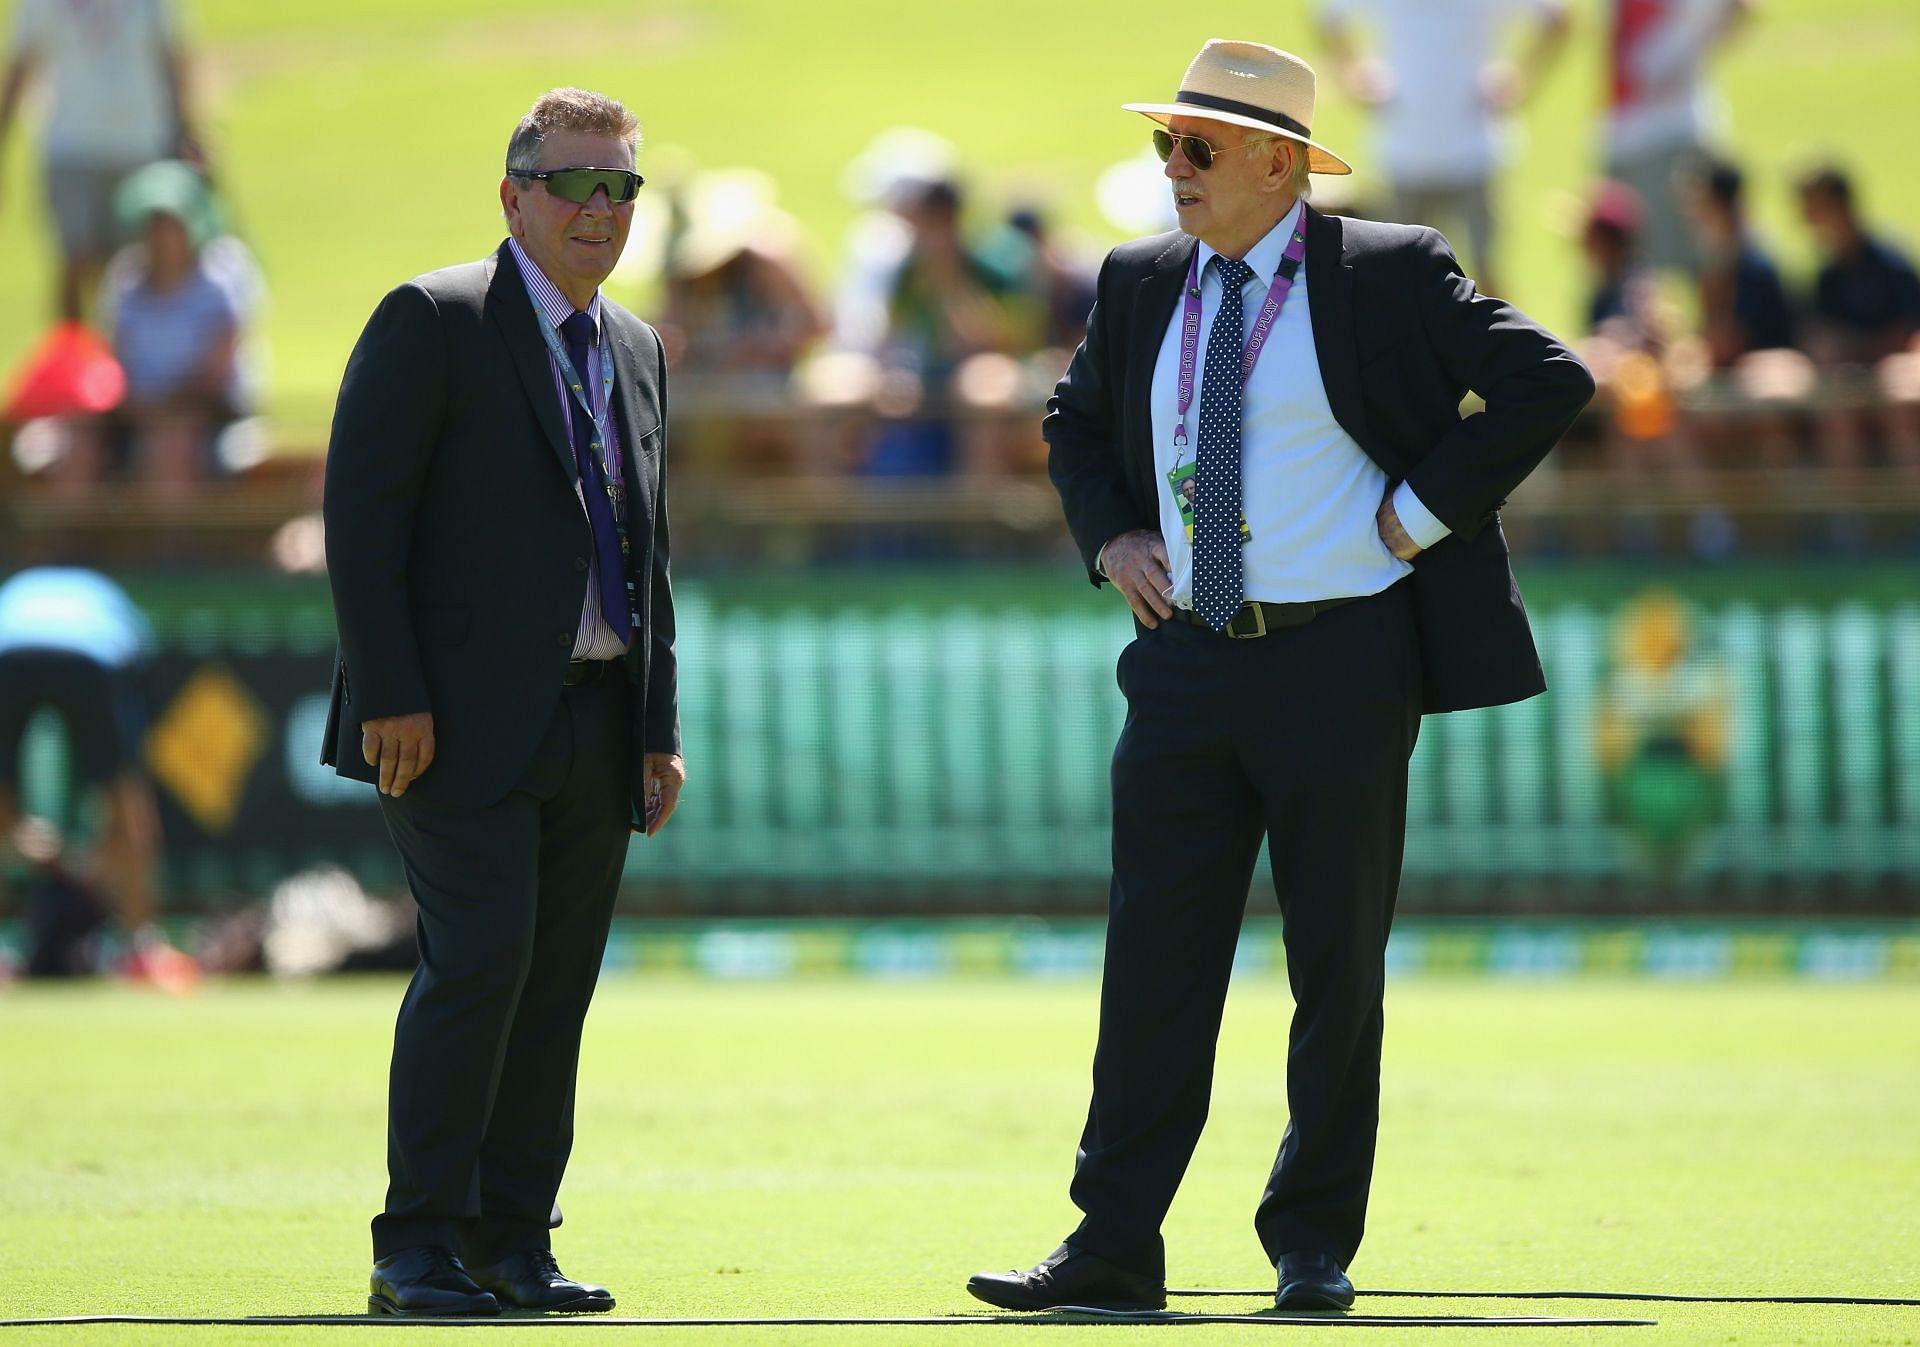 Rod Marsh and Ian Chappell. (Credits: Getty)